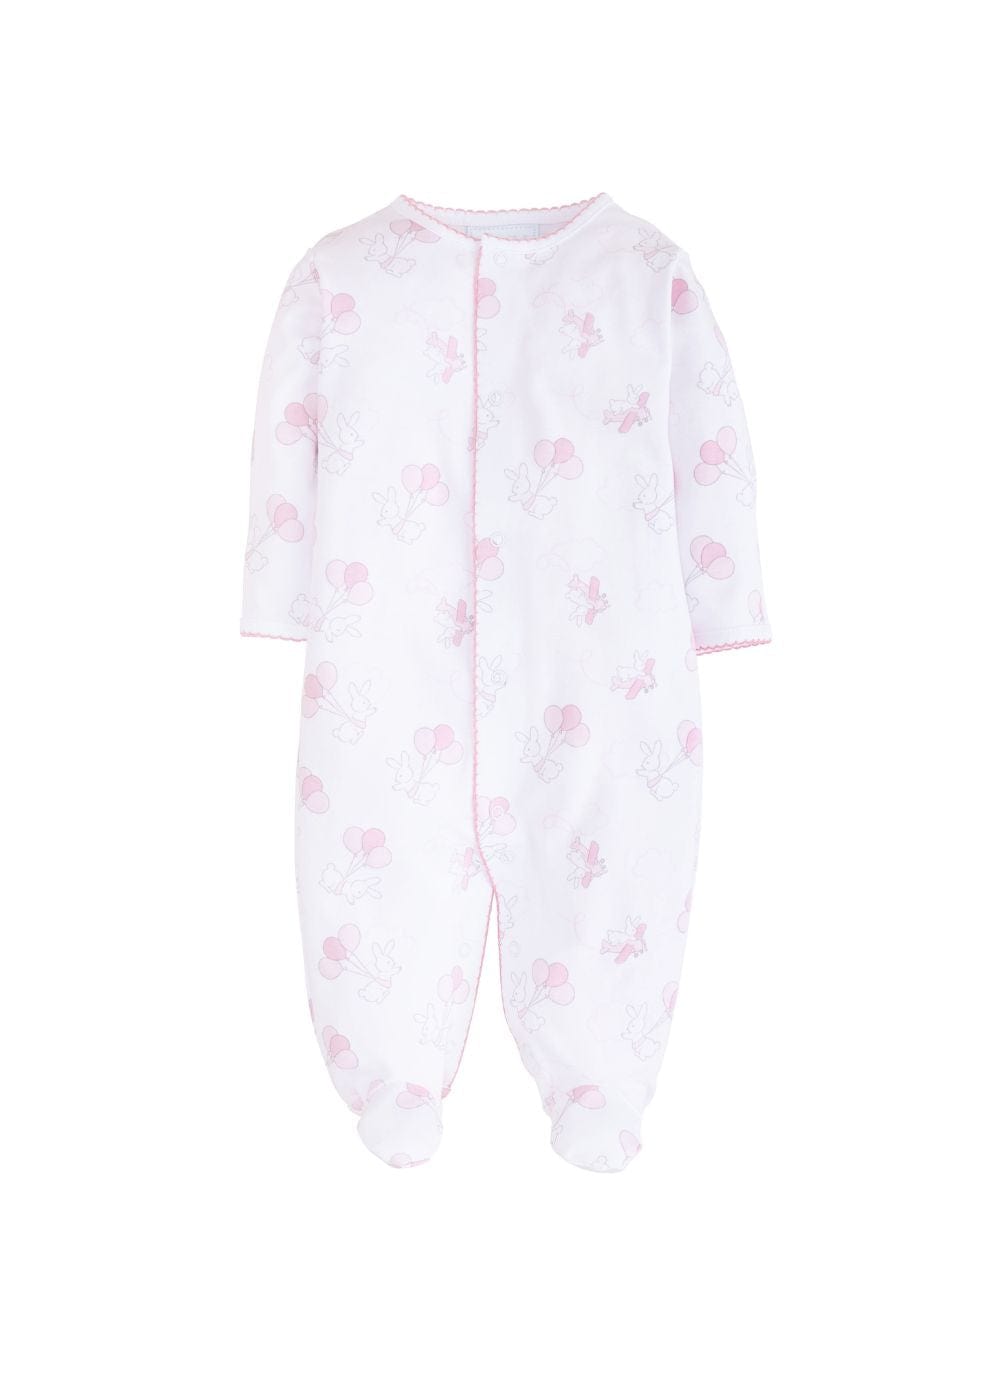 seguridadindustrialcr baby printed footie with pink flying bunny design for spring